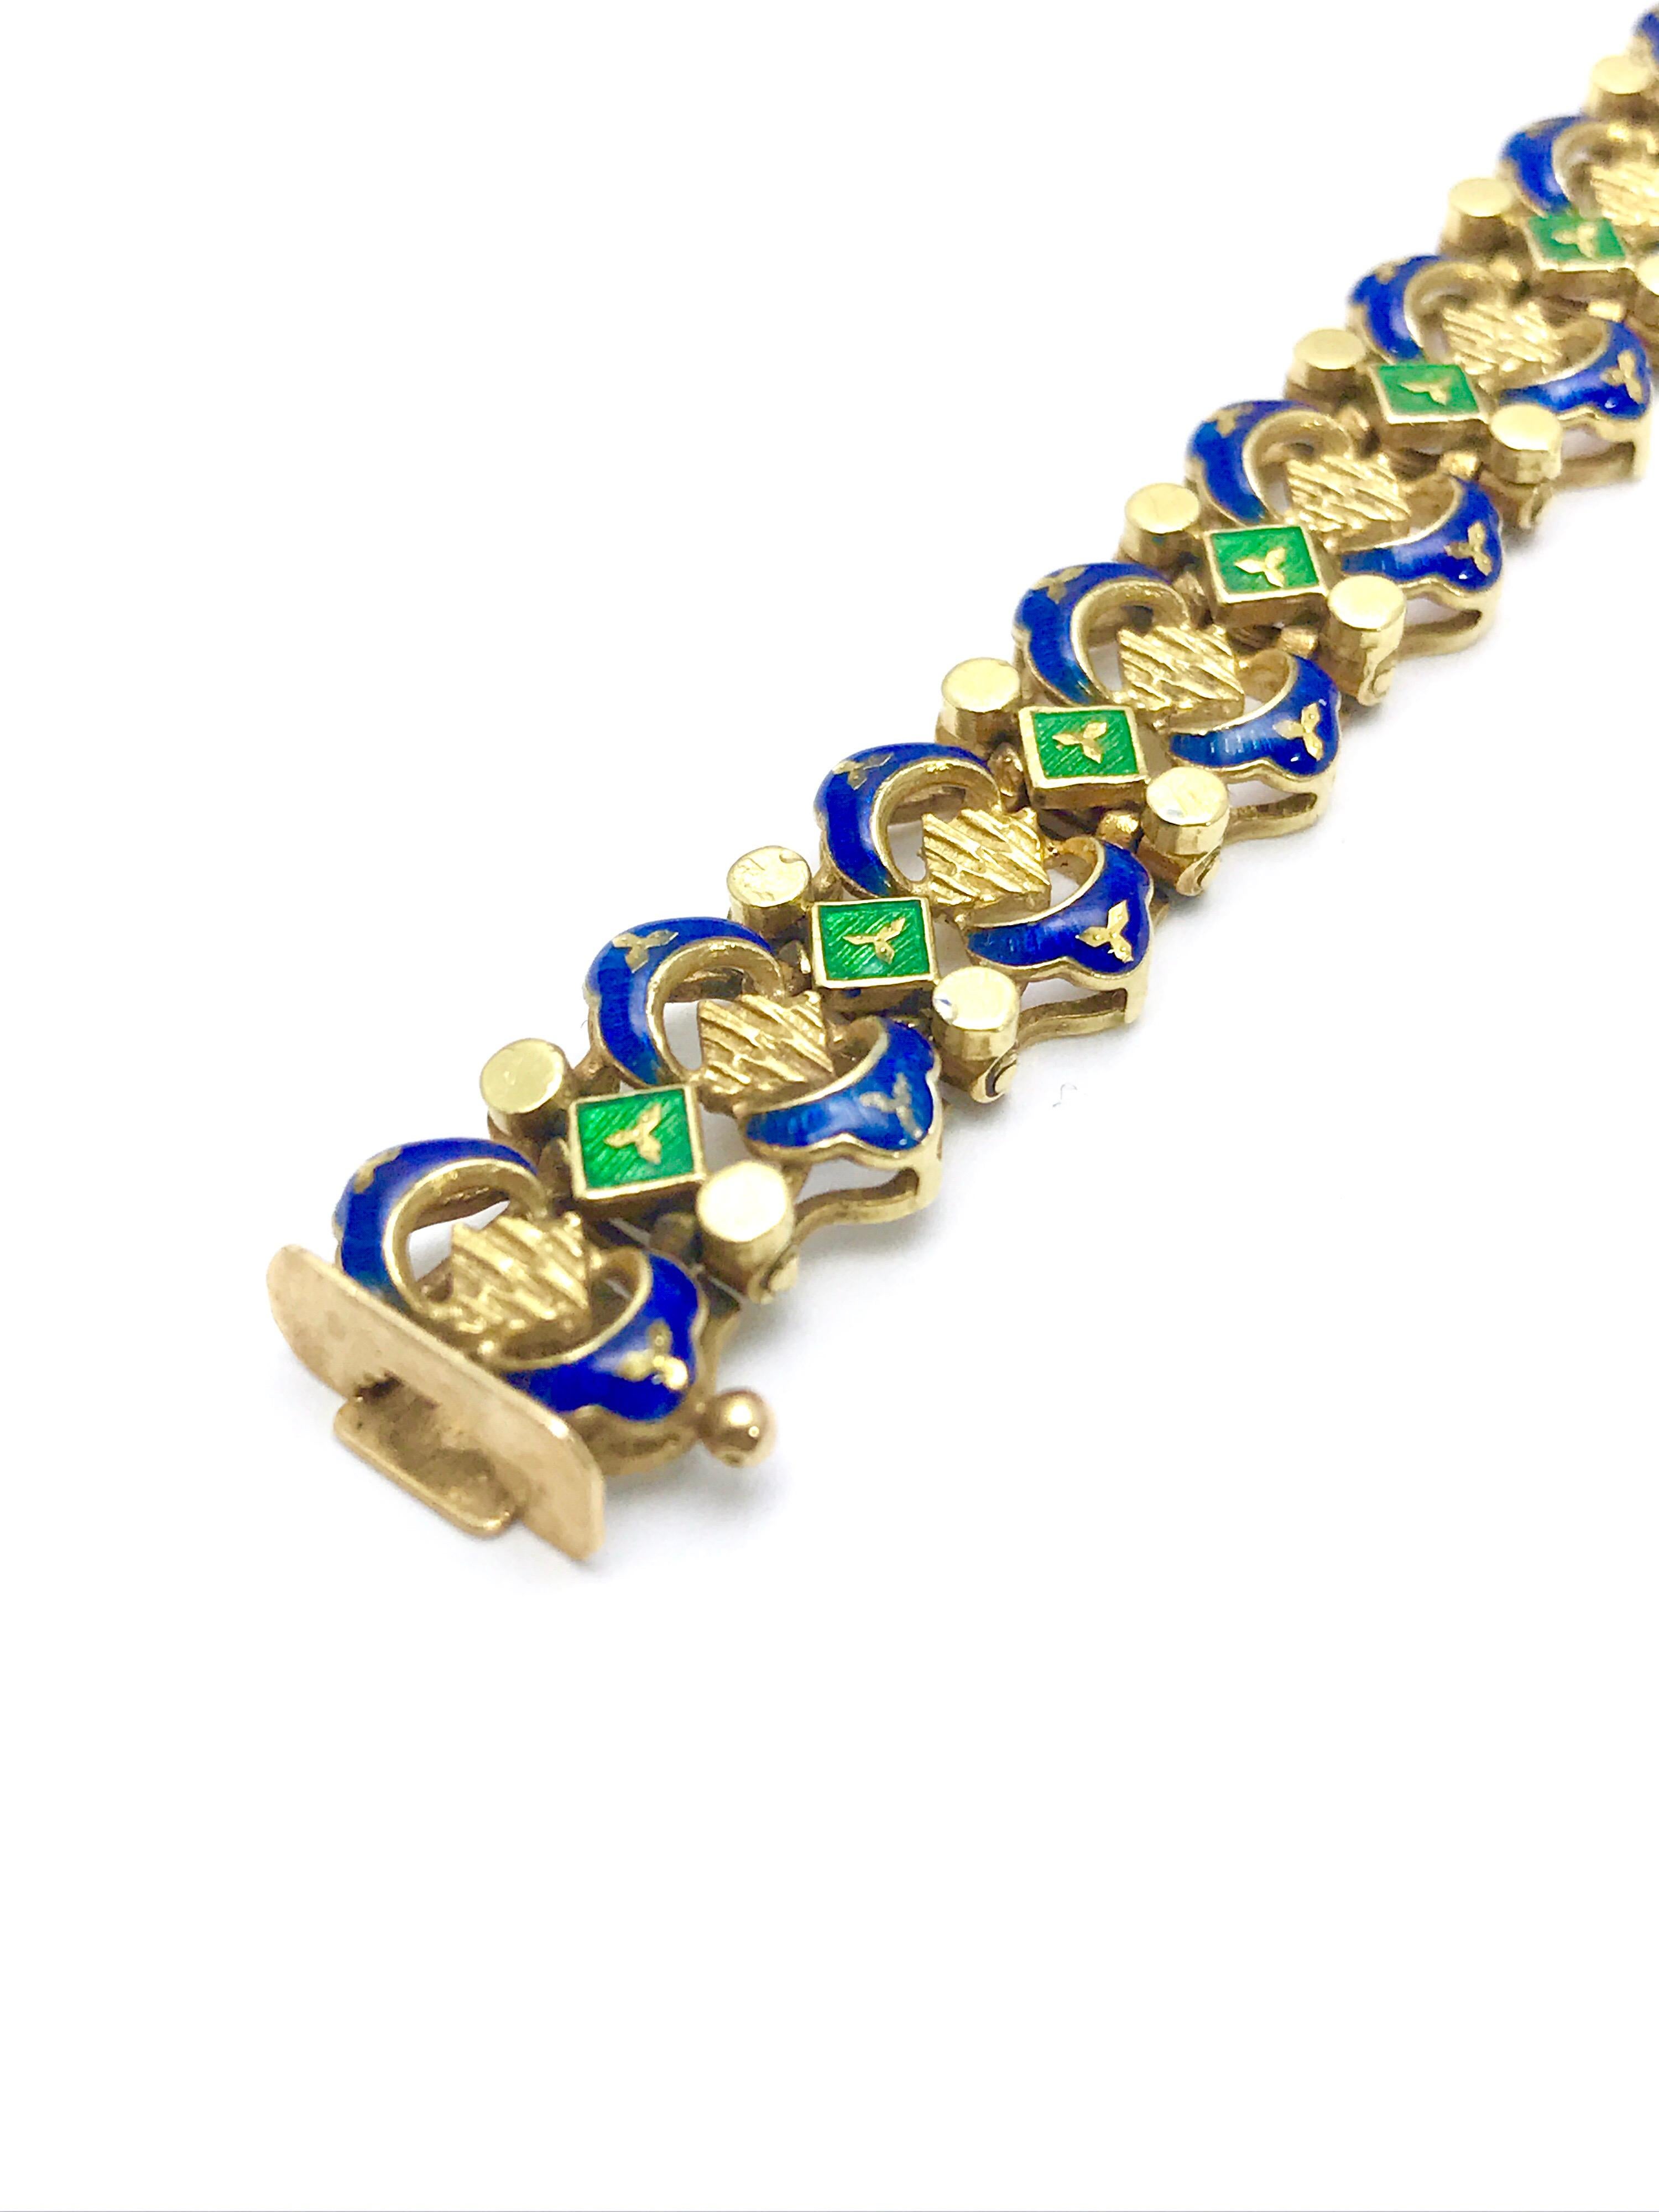 This is a beautiful Retro royal blue and shamrock green enamel and 18 karat yellow gold bracelet.  The enamel is perfectly intact and vibrant.  This is a great bracelet, easily worn all the time.  The bracelet is 7.50 inches in length.  The clasp is